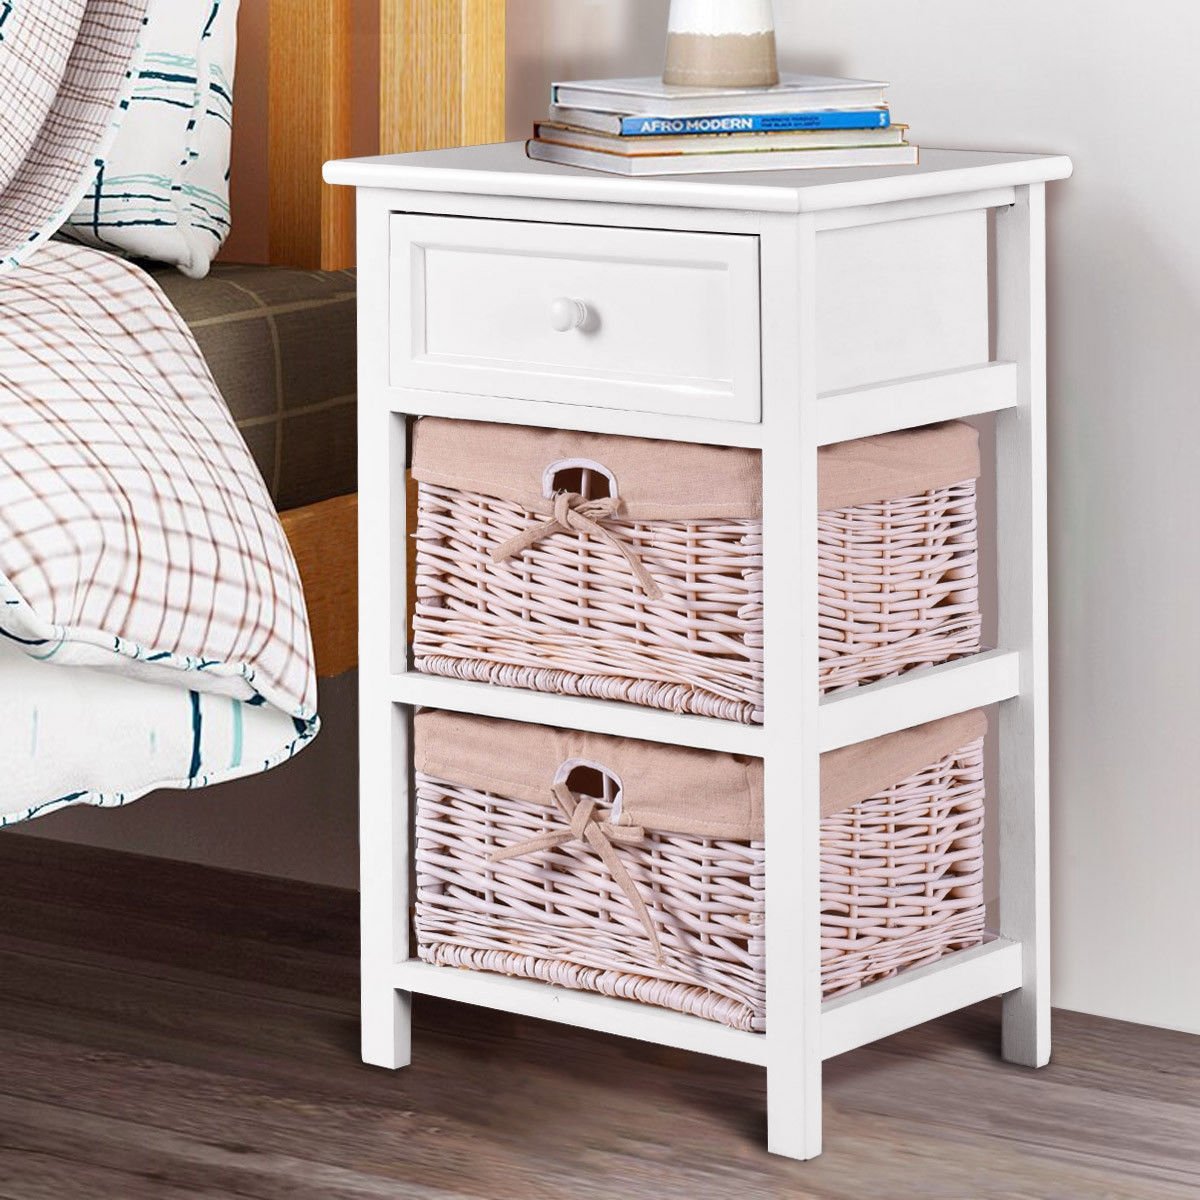 3 Tiers Wooden Storage Nightstand with 2 Baskets and 1 Drawer-white, White - Gallery Canada